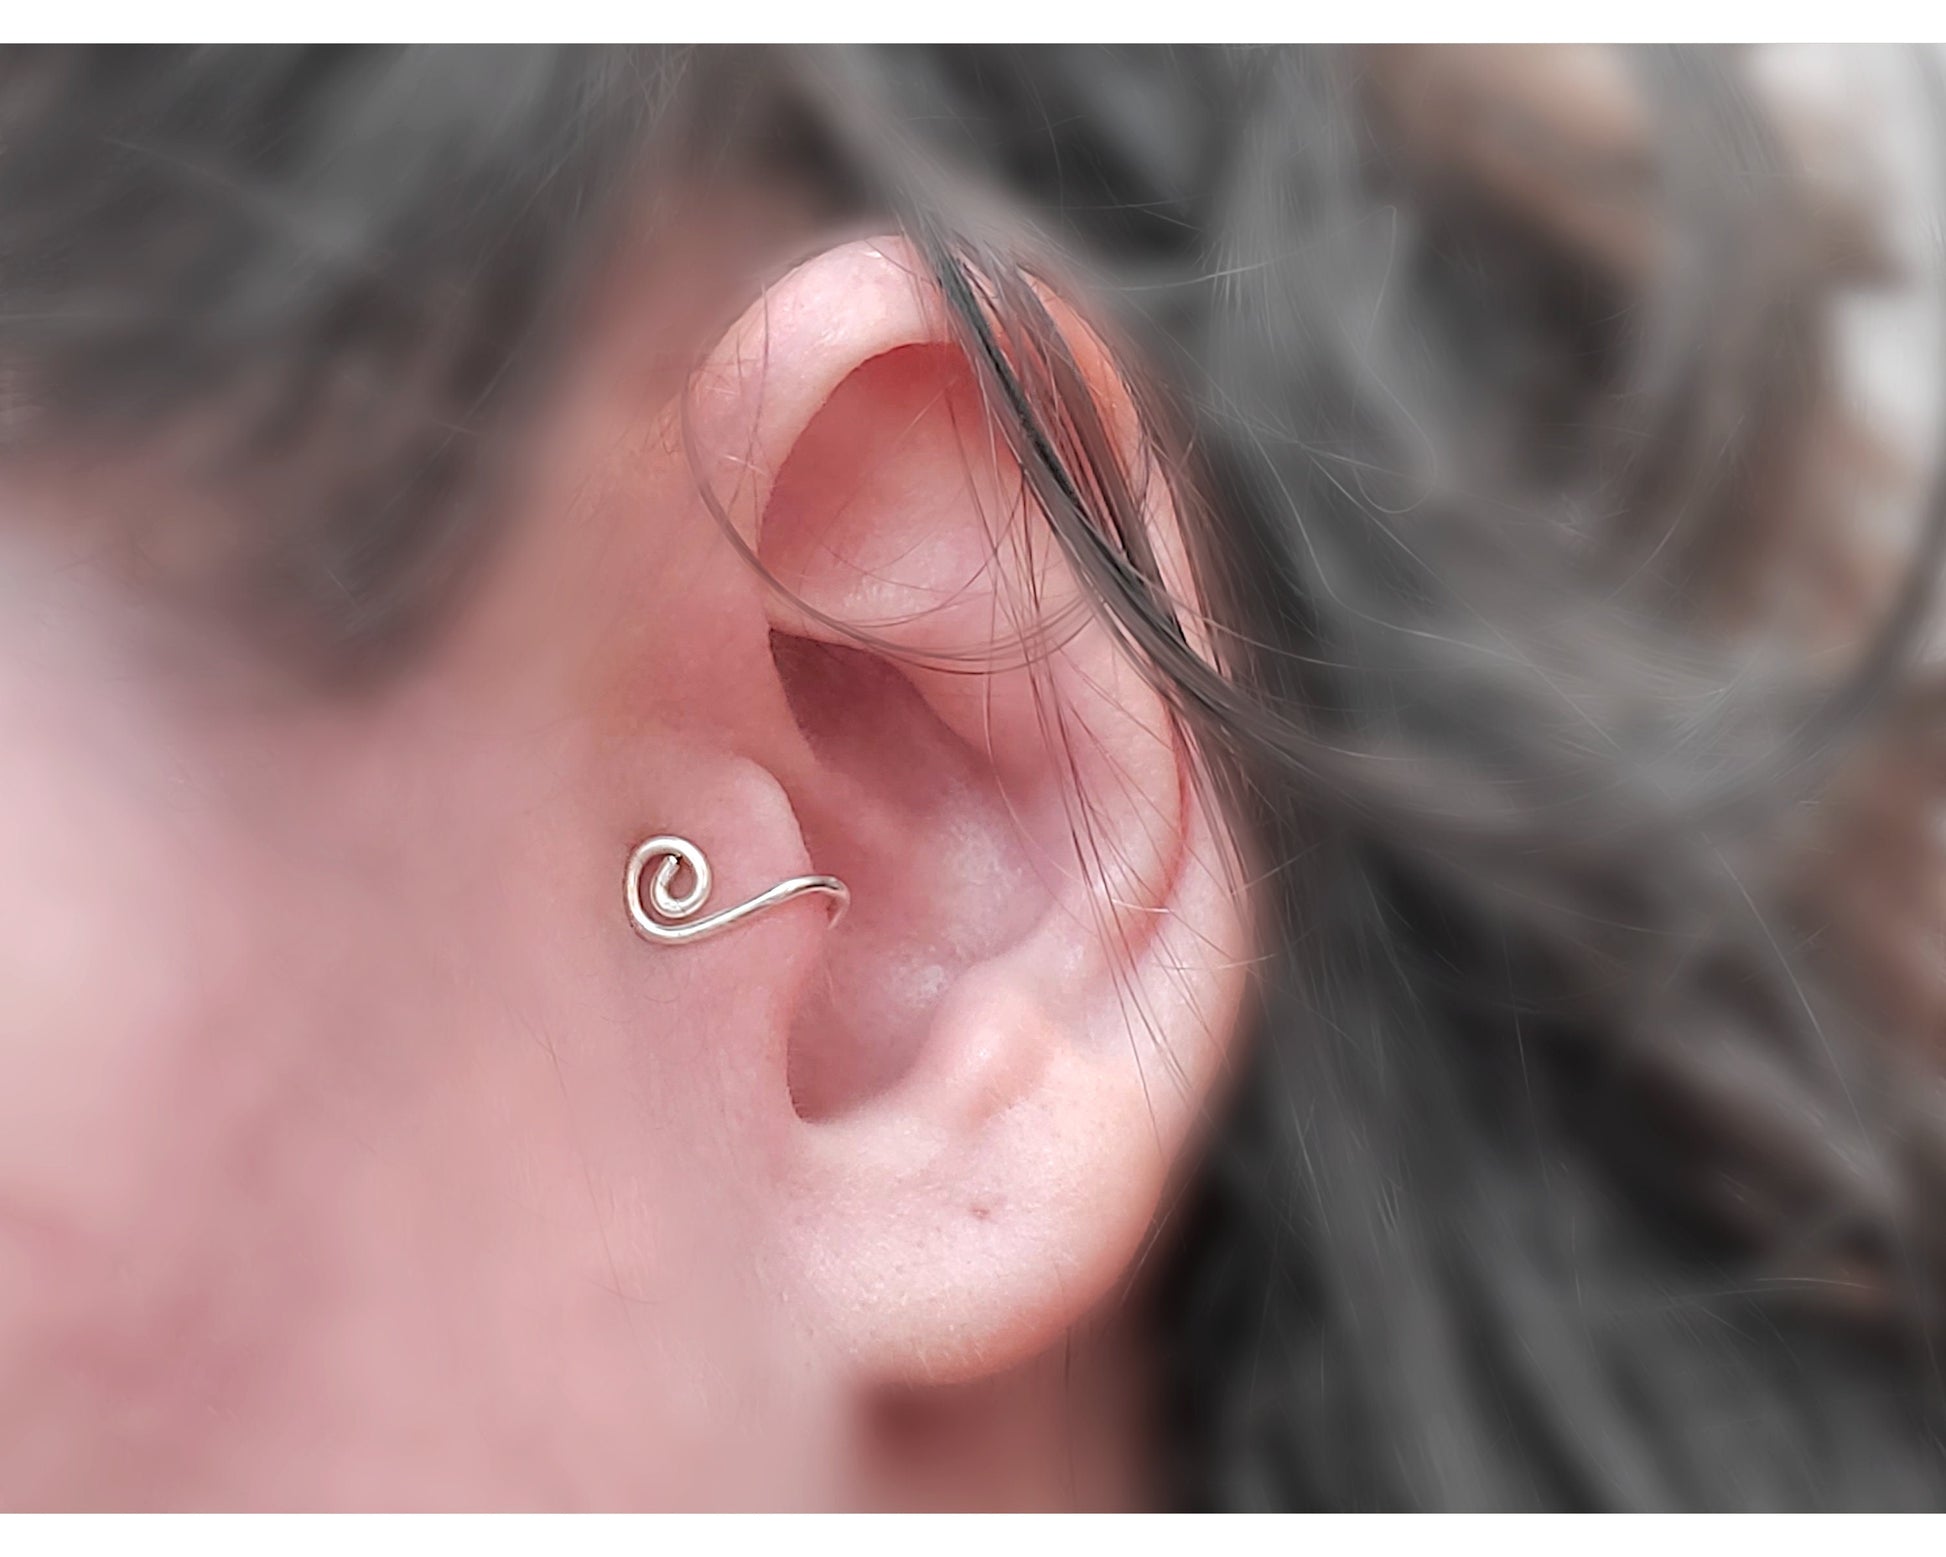 Ear Tragus or Nose Side Cuff, Single Spiral, Reversible, Adjustable, Simple, Minimalist, Unisex, Boho, Beach, Choice of Colors and Metals